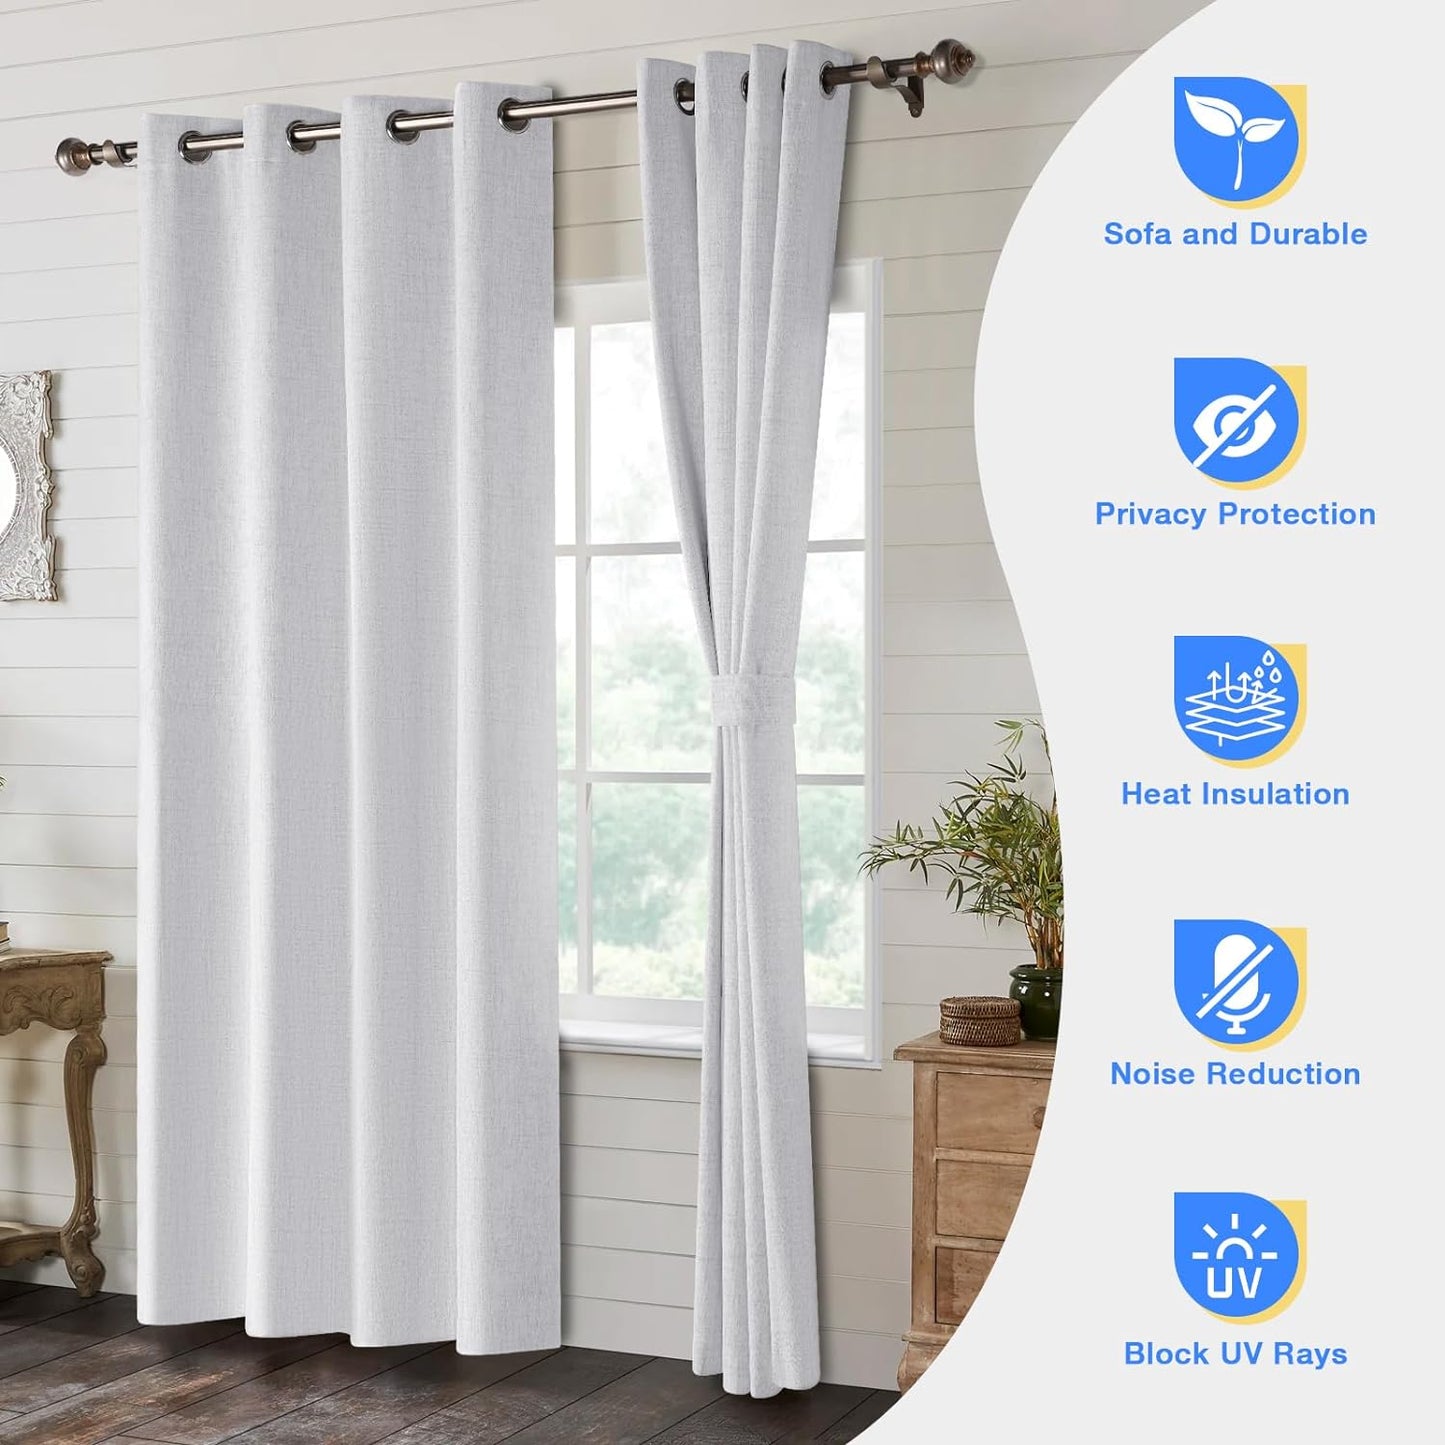 Timeles 100% Blackout Window Curtains 84 Inch Length for Living Room Textured Linen Curtains Sliver Grommet Pinch Pleated Room Darkening Curtain with White Liner/Ties(2 Panel W52 X L84, Ivory)  Timeles   